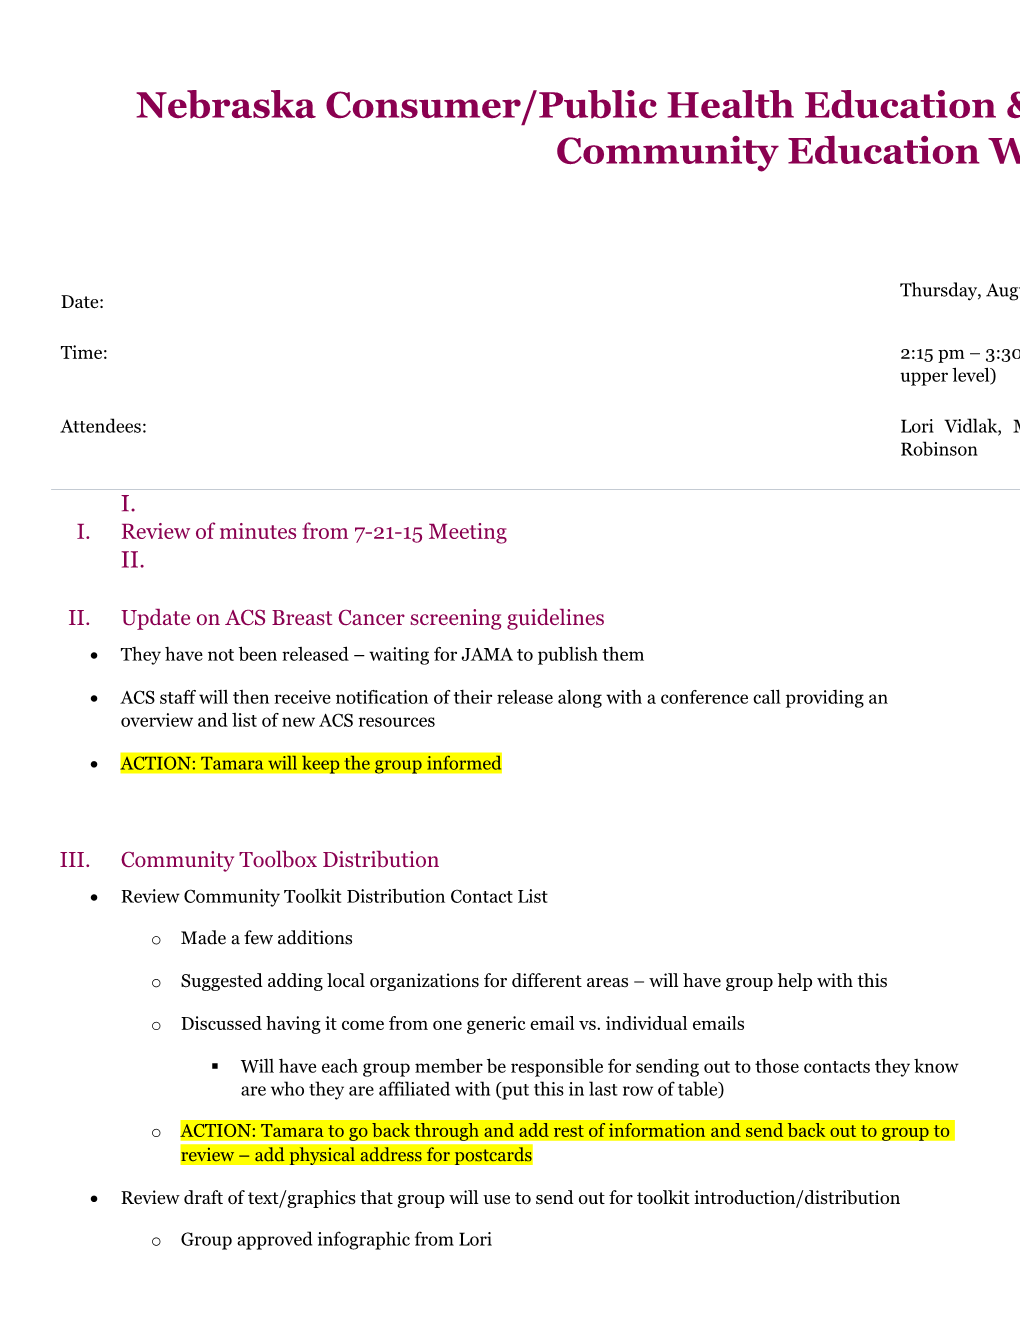 I.Review of Minutes from 7-21-15 Meeting